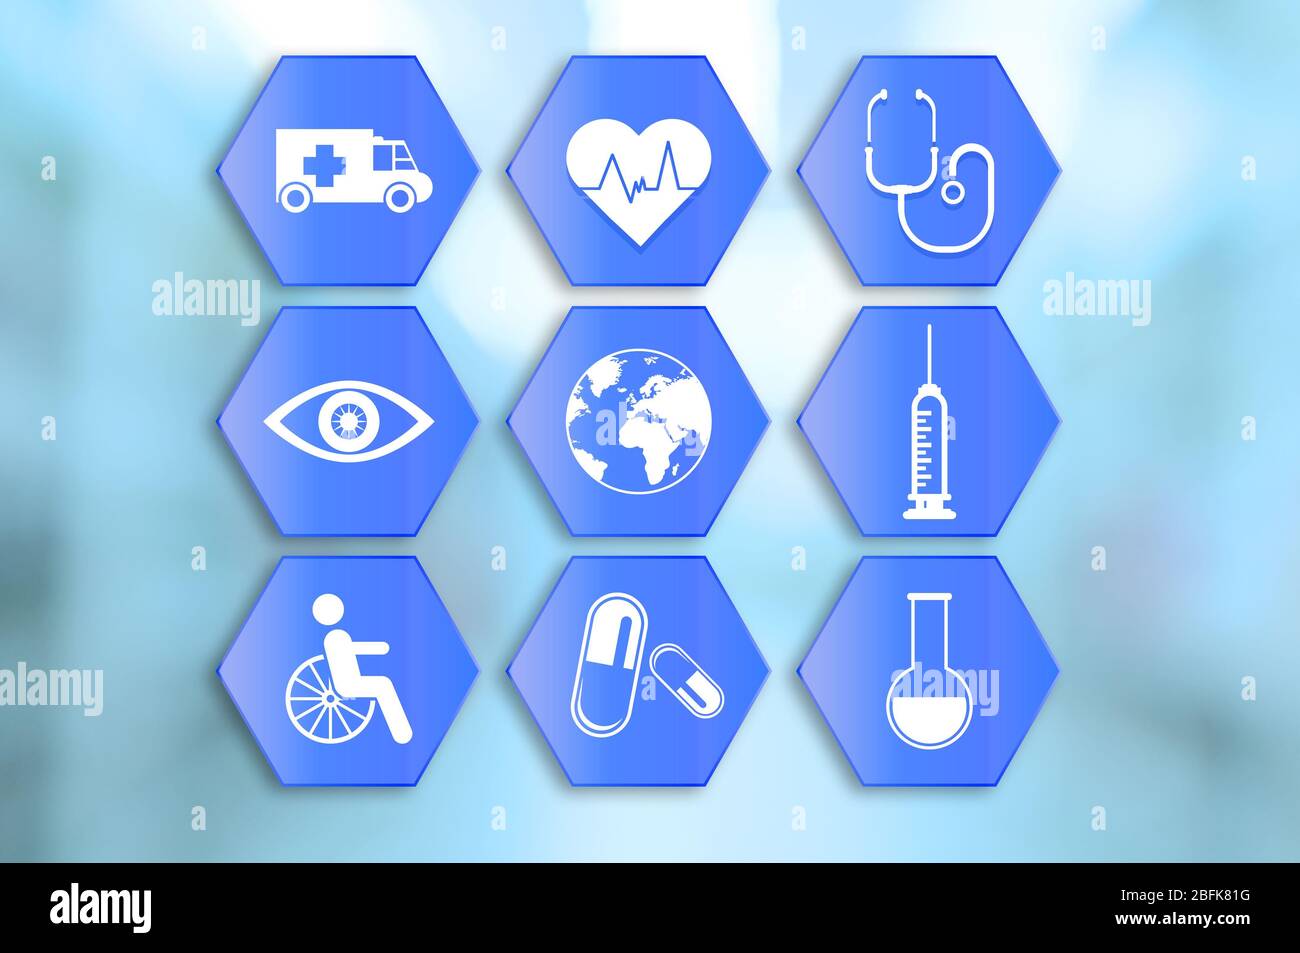 Medical icons set on abstract blue background Stock Photo